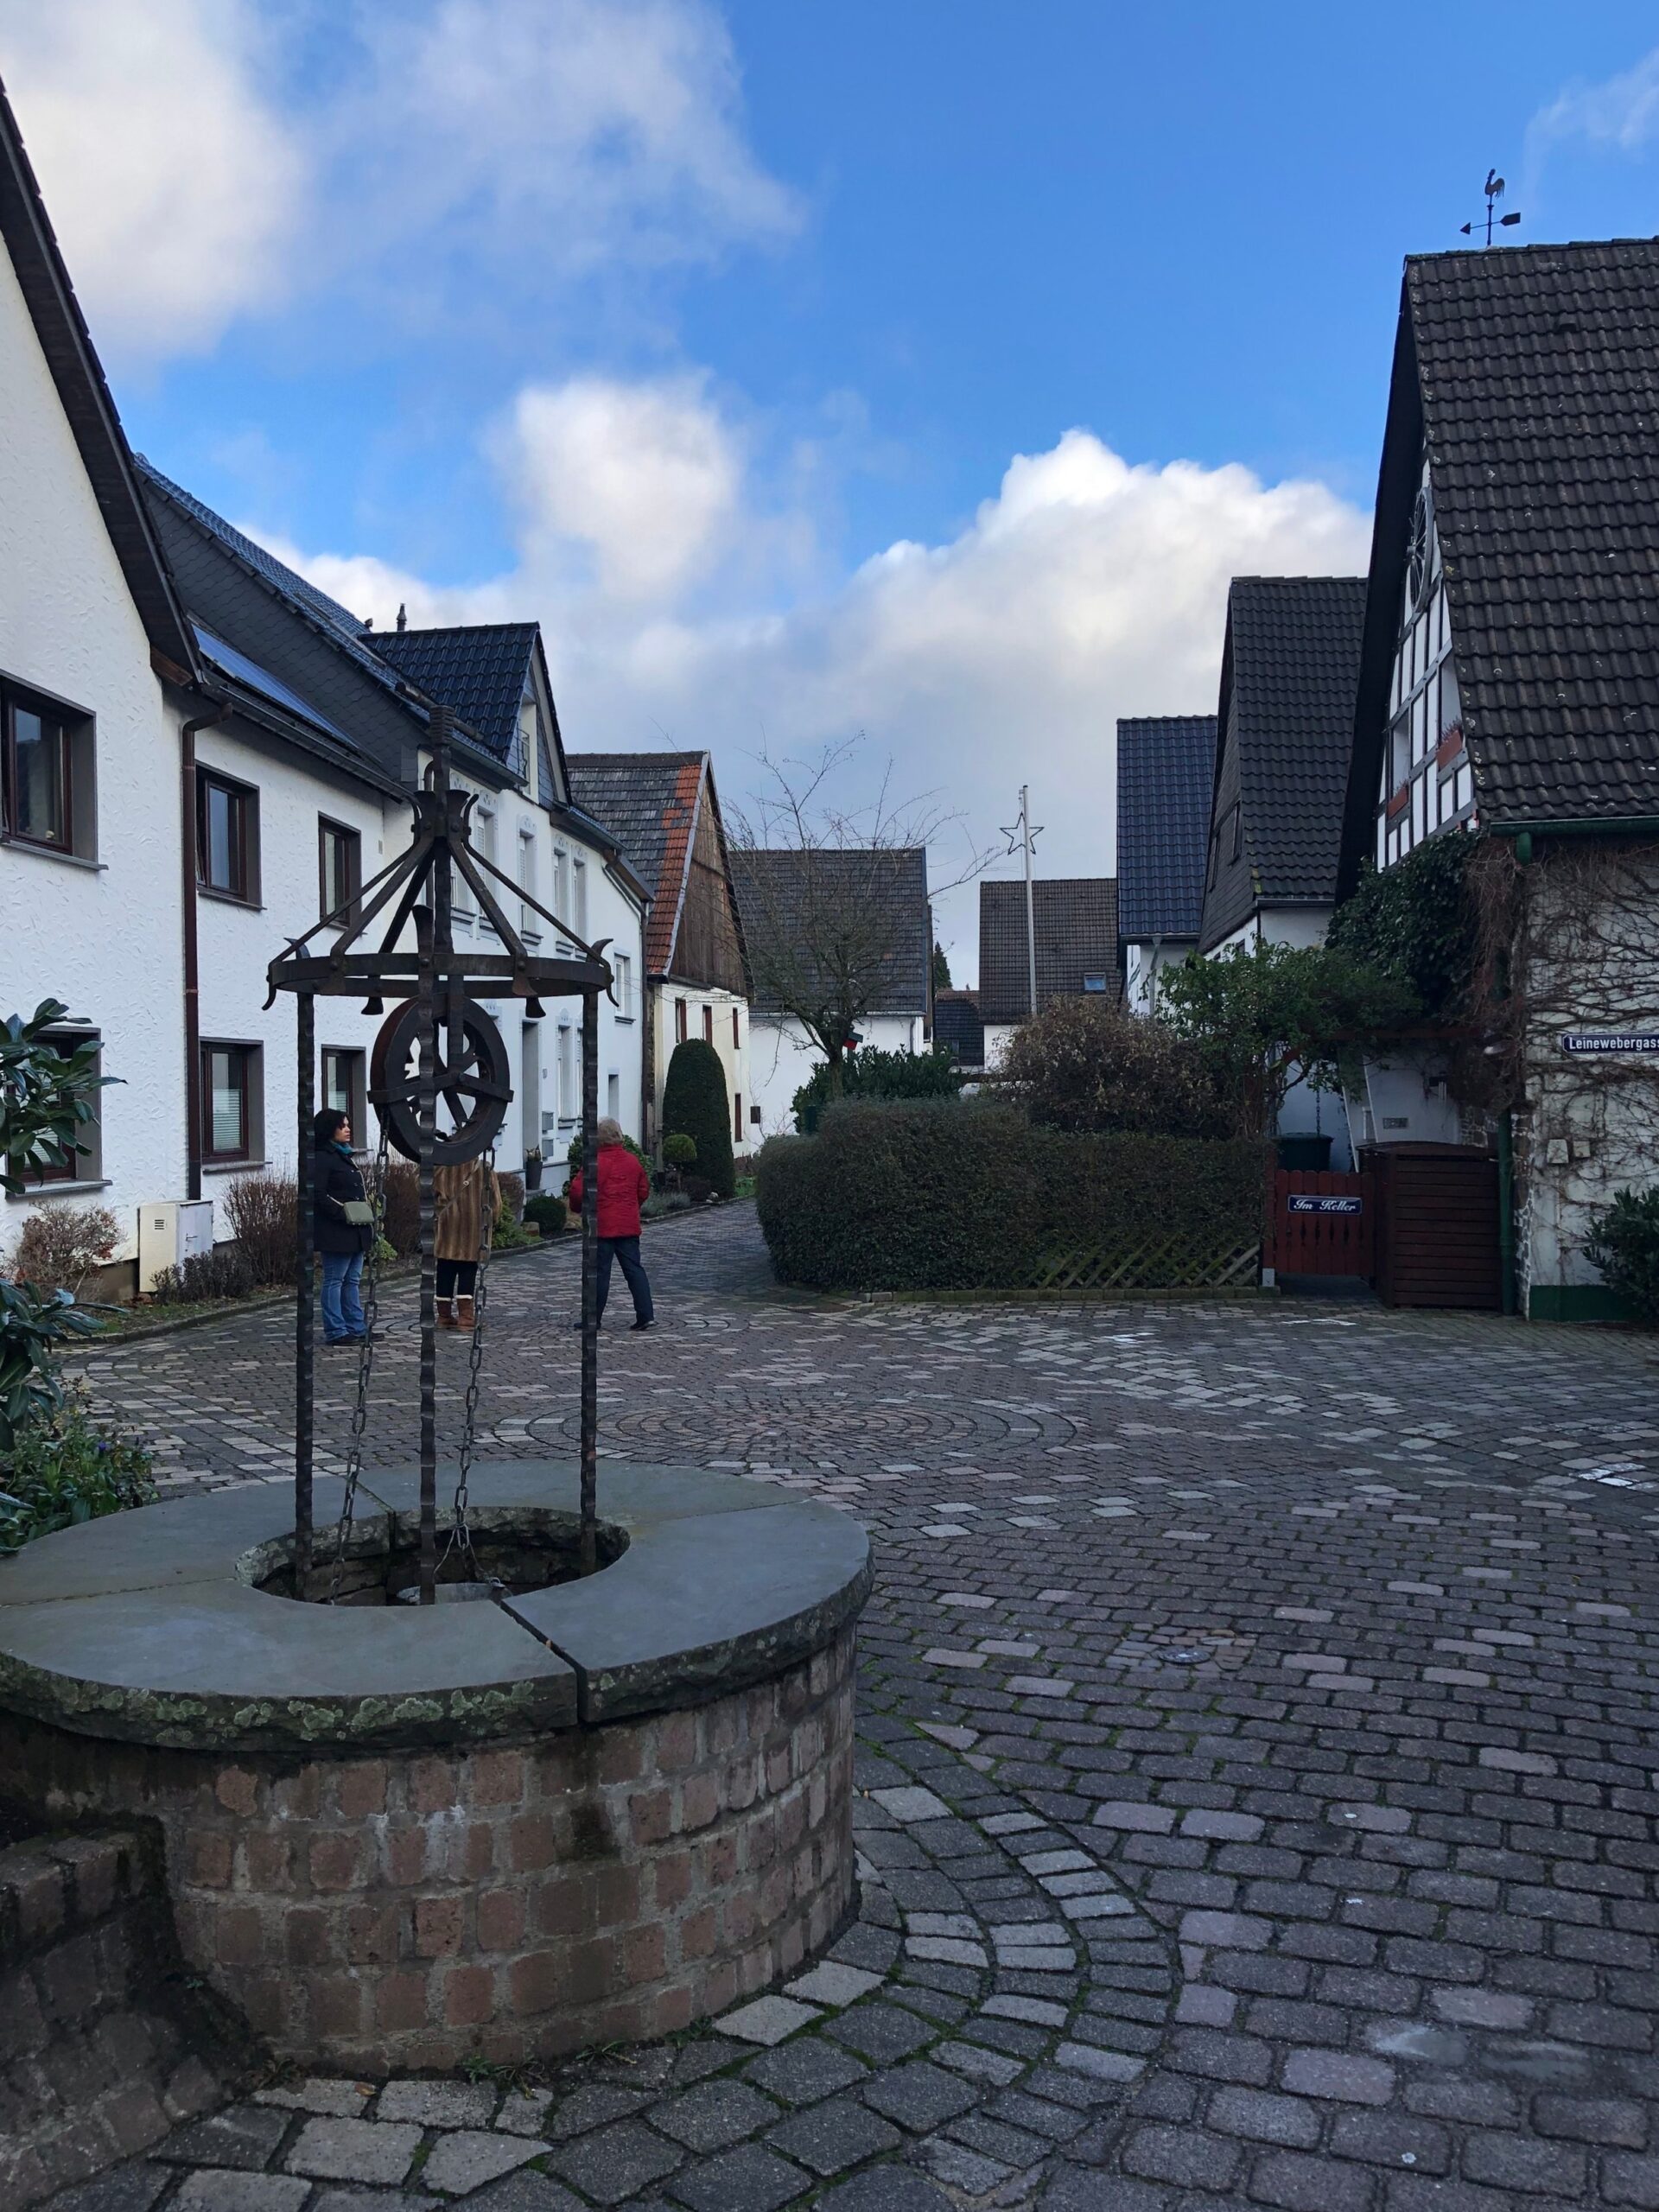 Small town square of Neuenrade Germany with cobblestone ground and a well